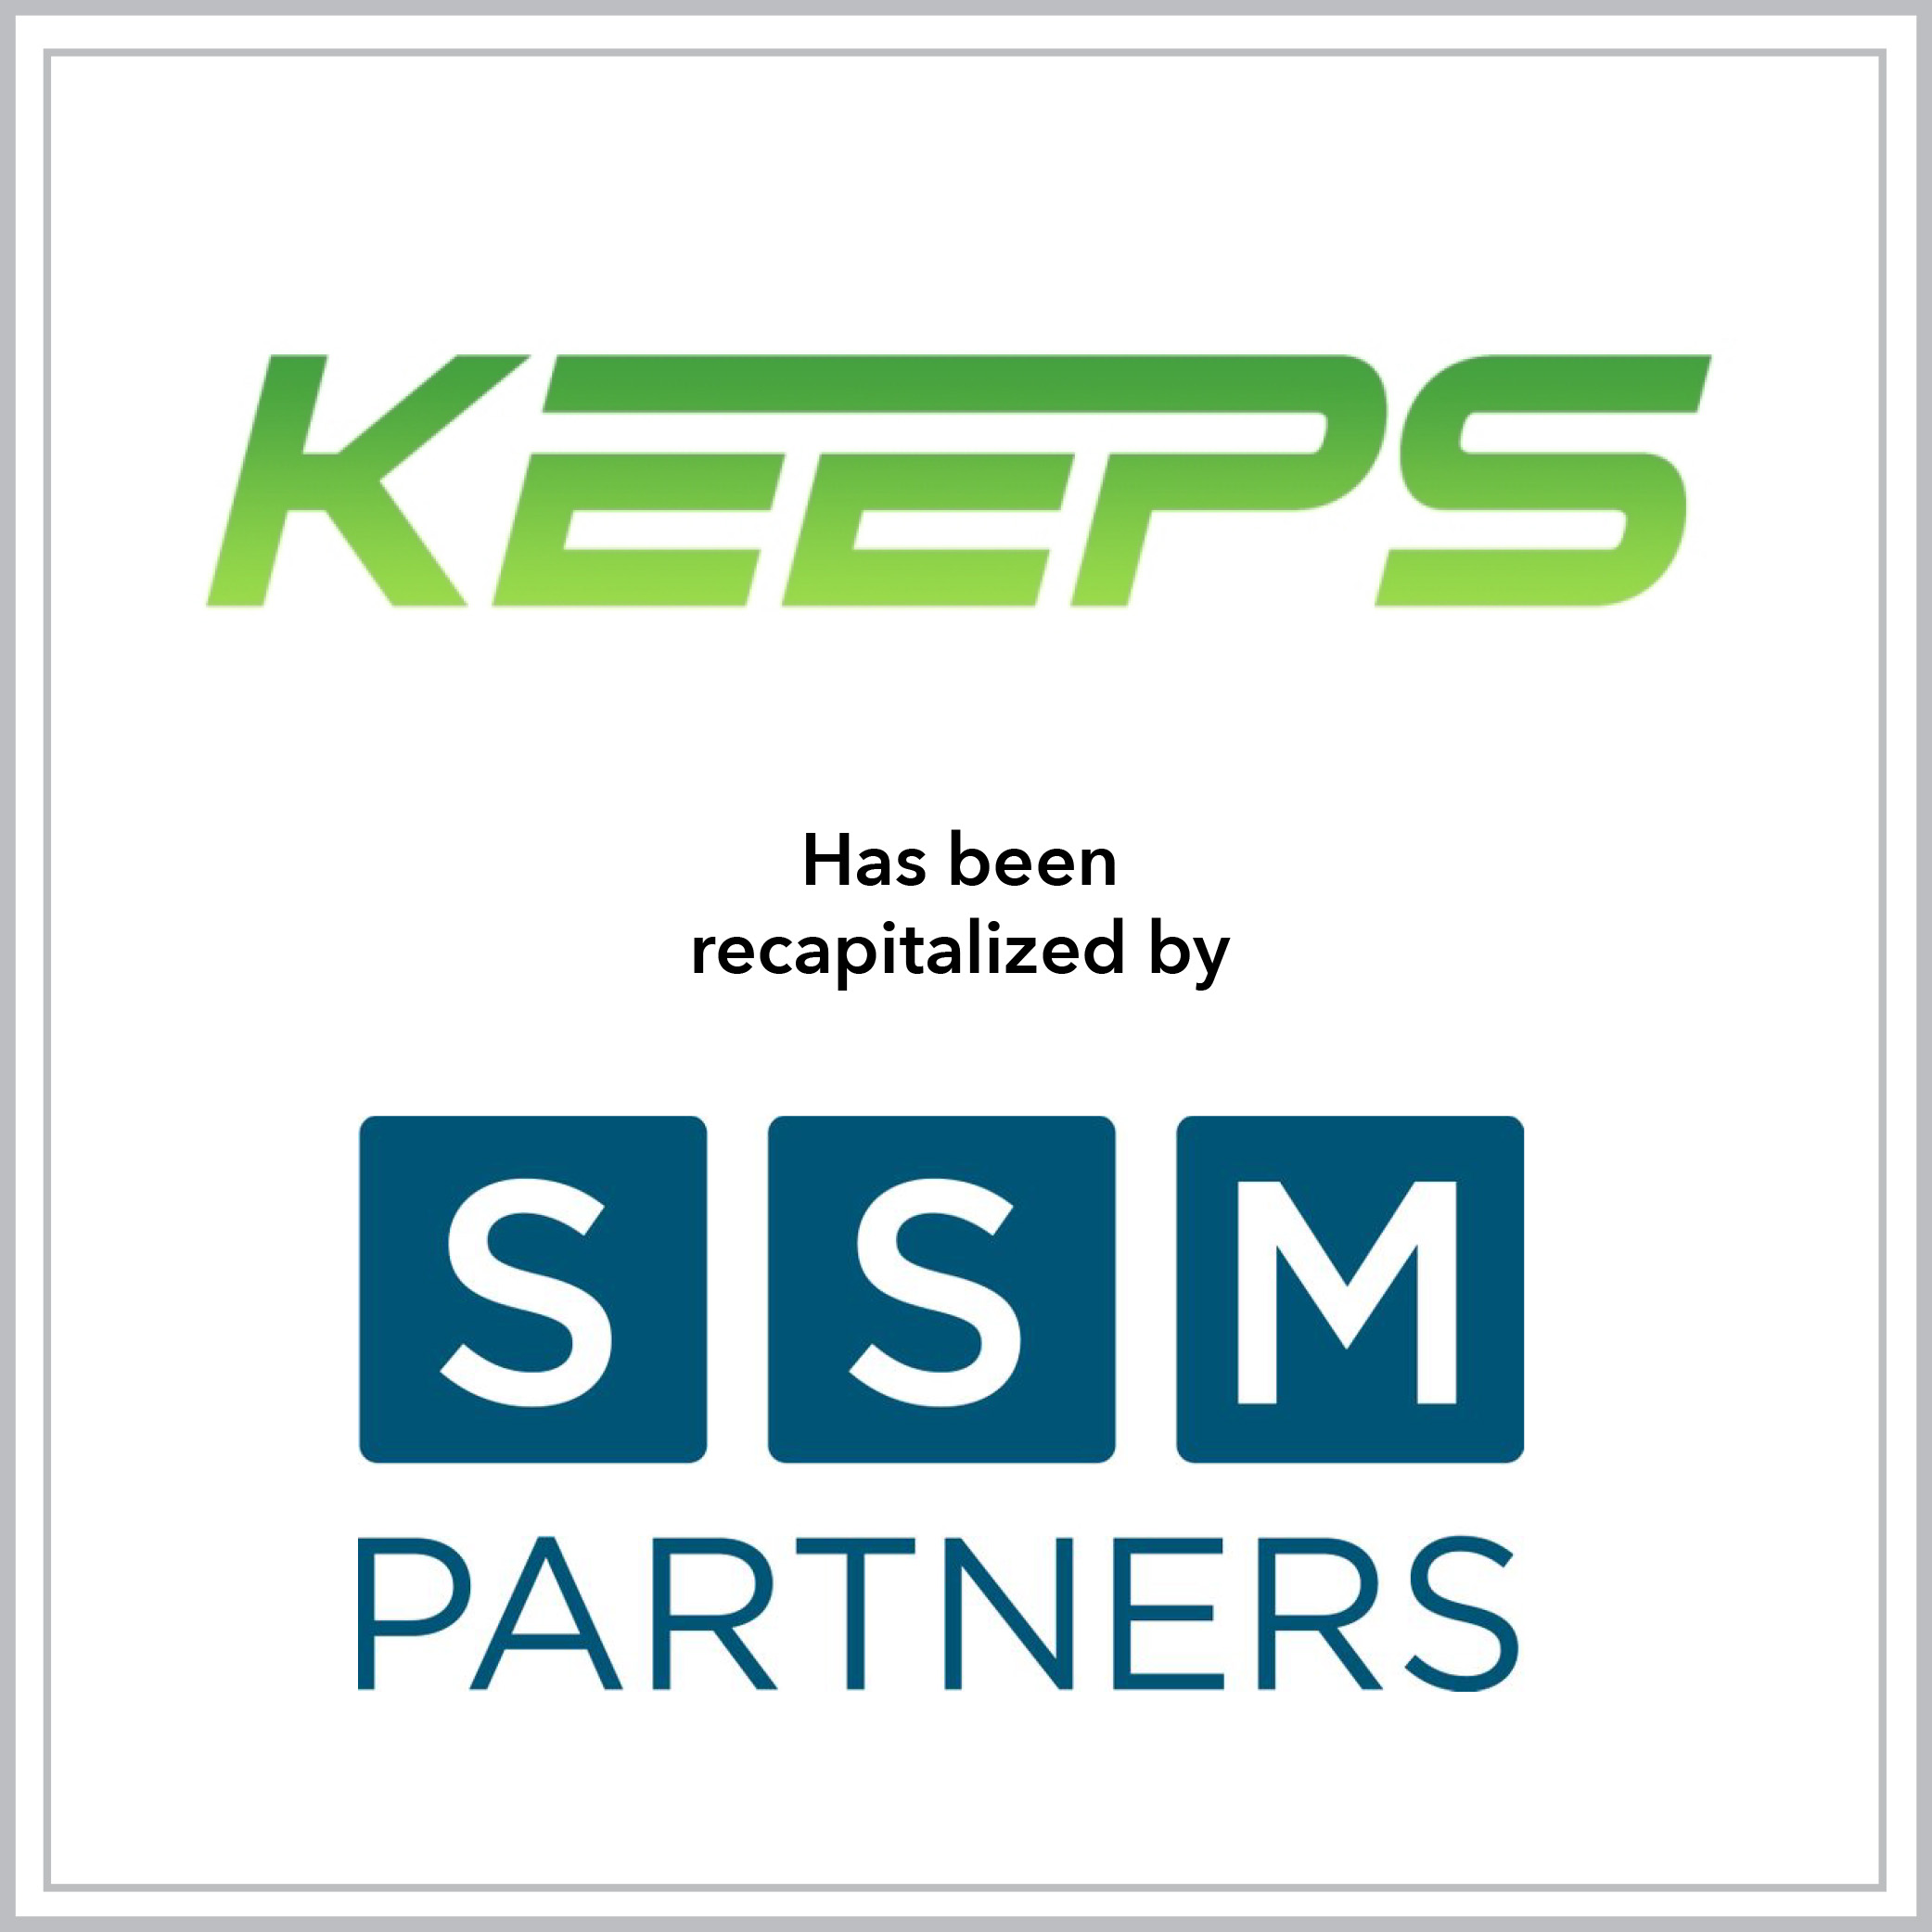 Keeps has been recapitalized by SSM Partners